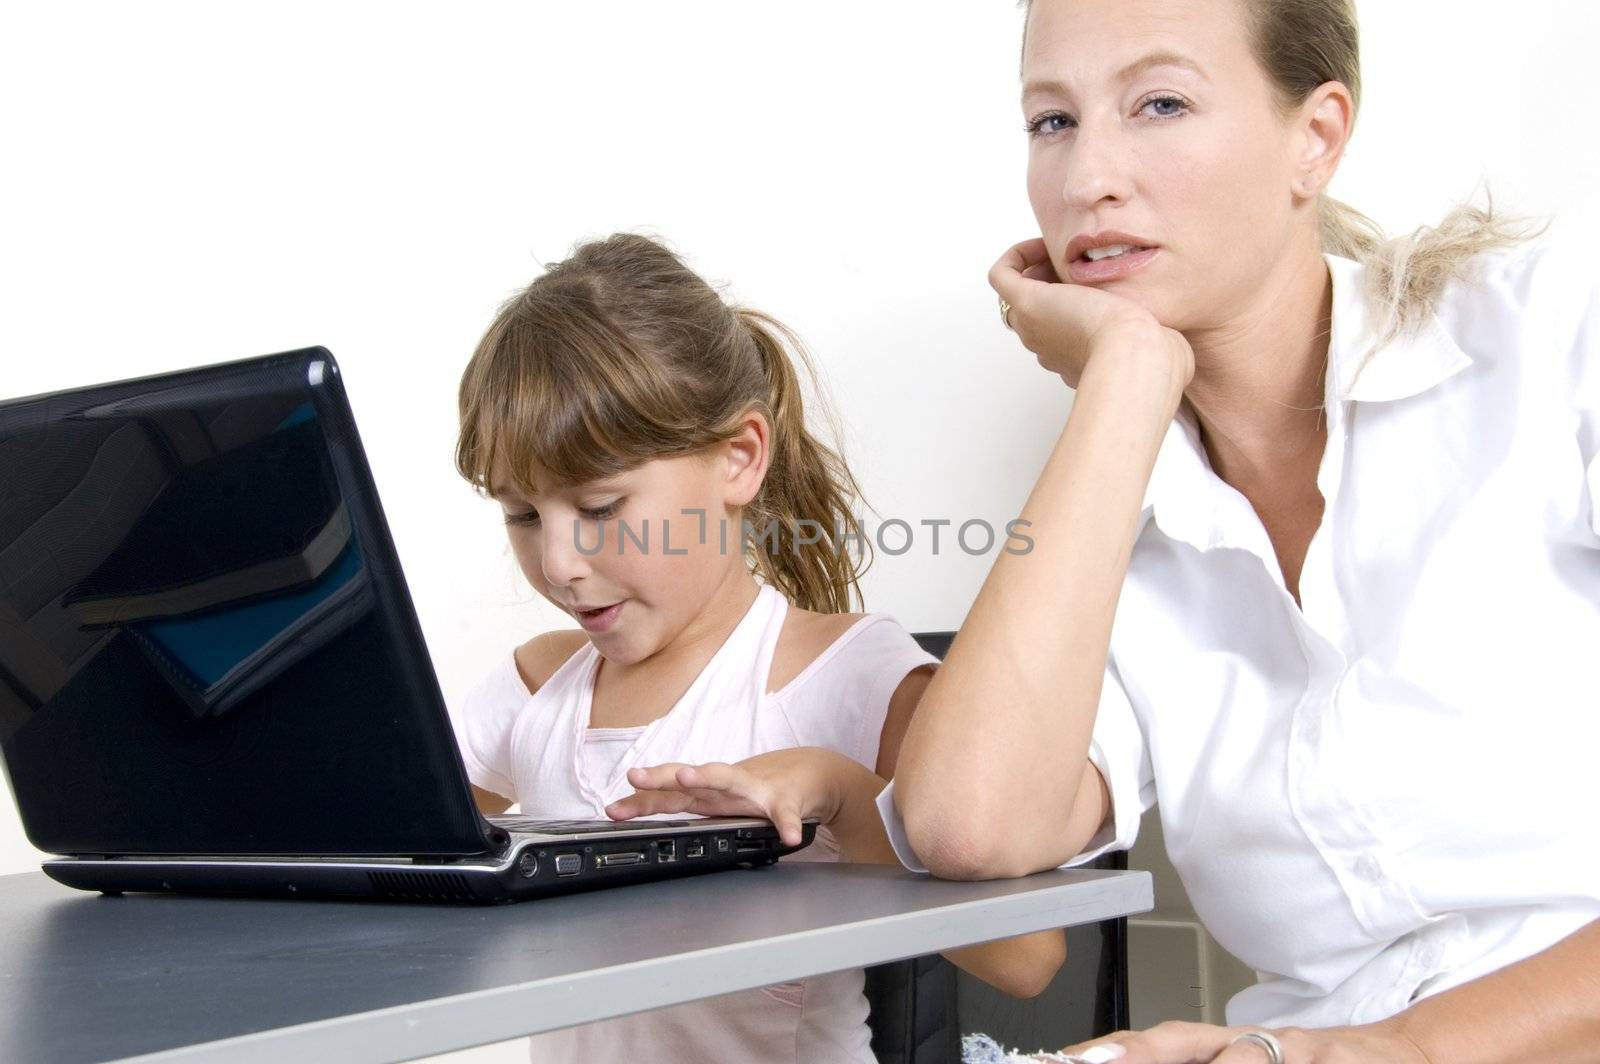 mother and daughter working on laptop by imagerymajestic